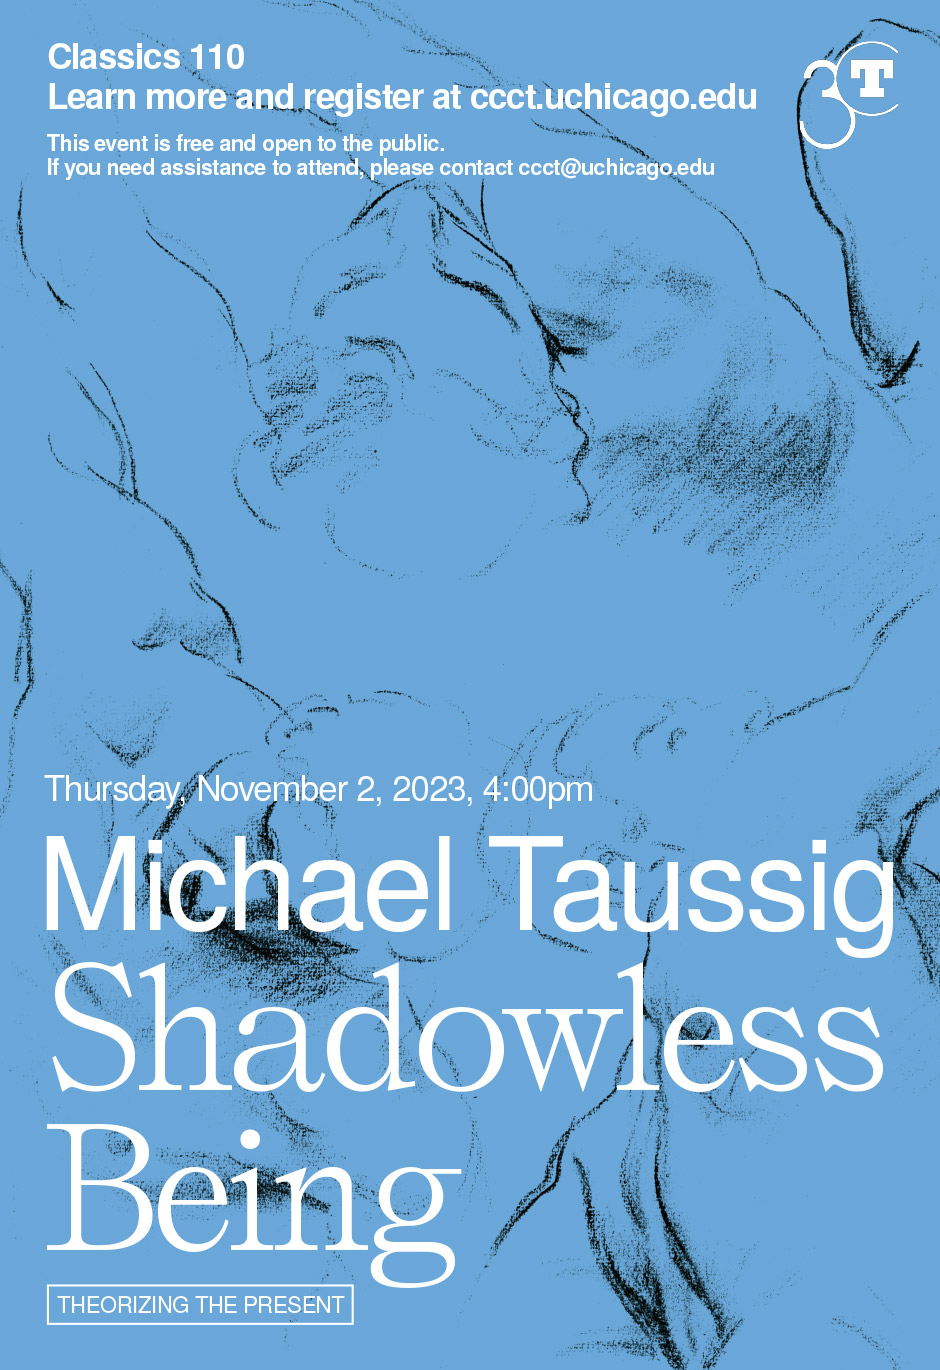 Event poster with white text over a blue background with black sketches of human figures